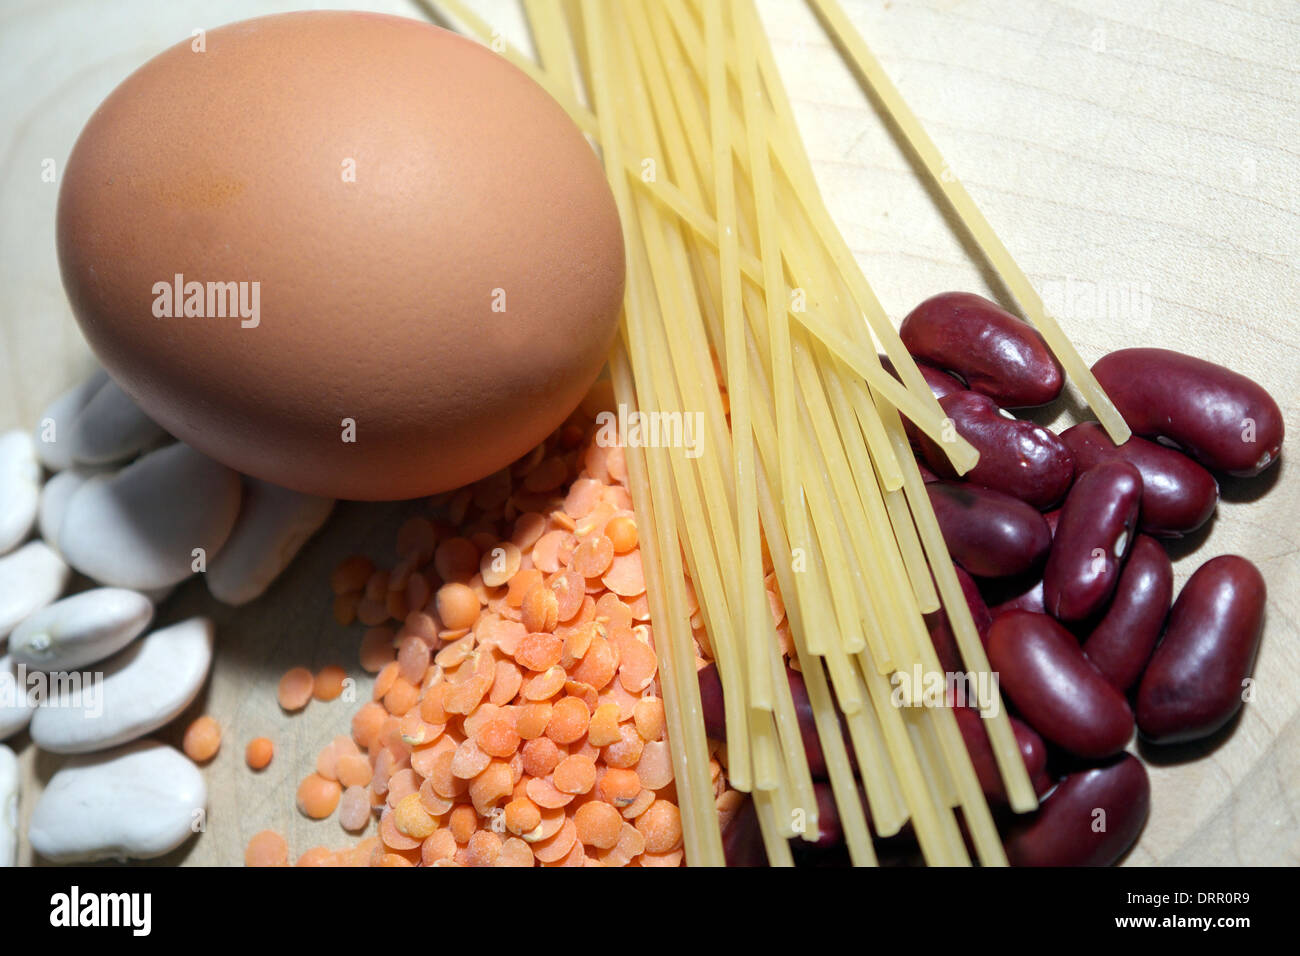 A still-life study of an egg,beans,pasta and red lentils. Stock Photo